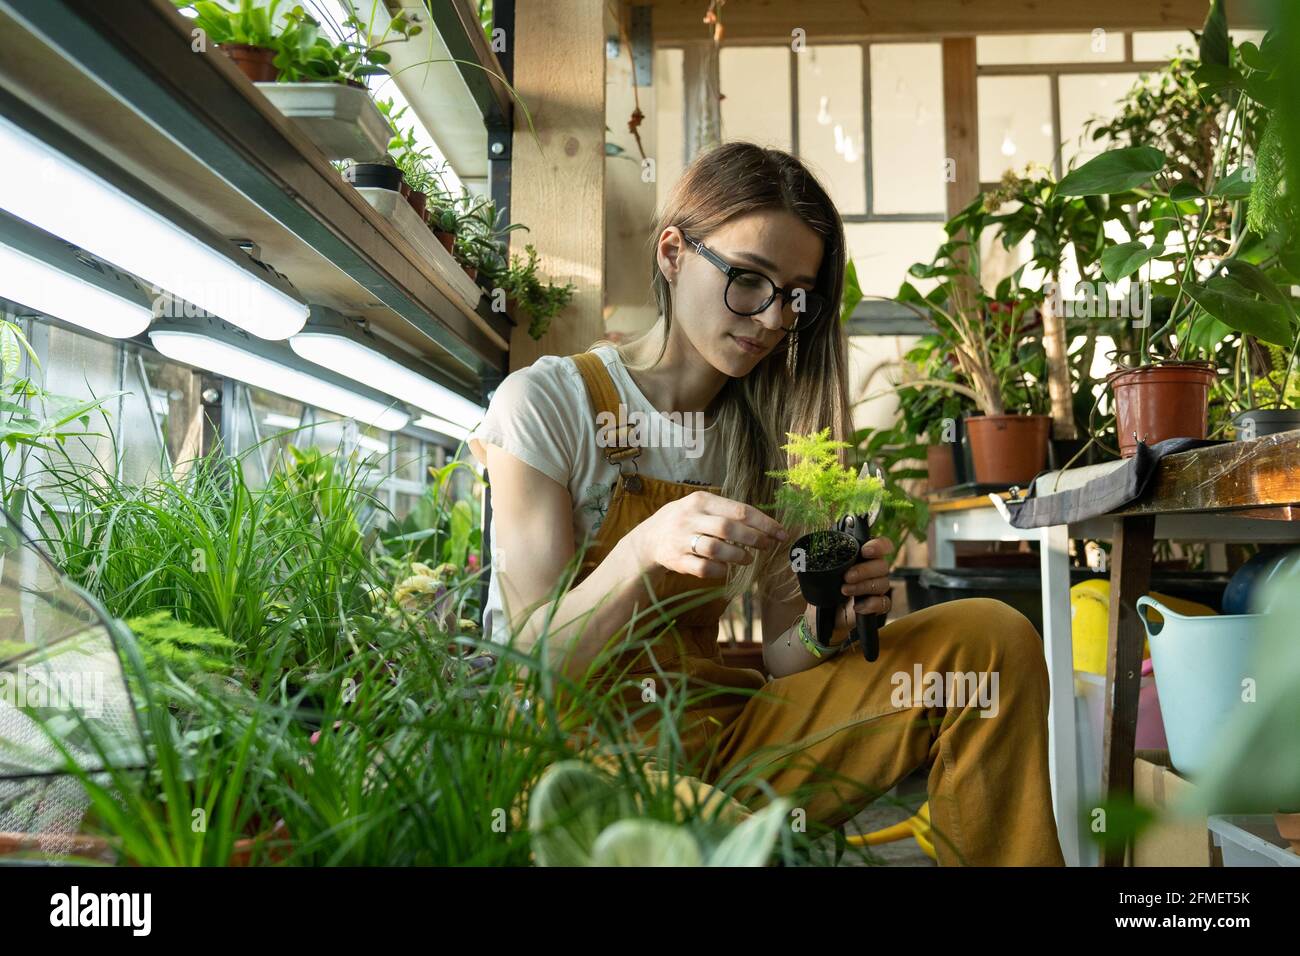 Young female care of potted plants after work, relax in indoor garden. Florist woman entrepreneur Stock Photo